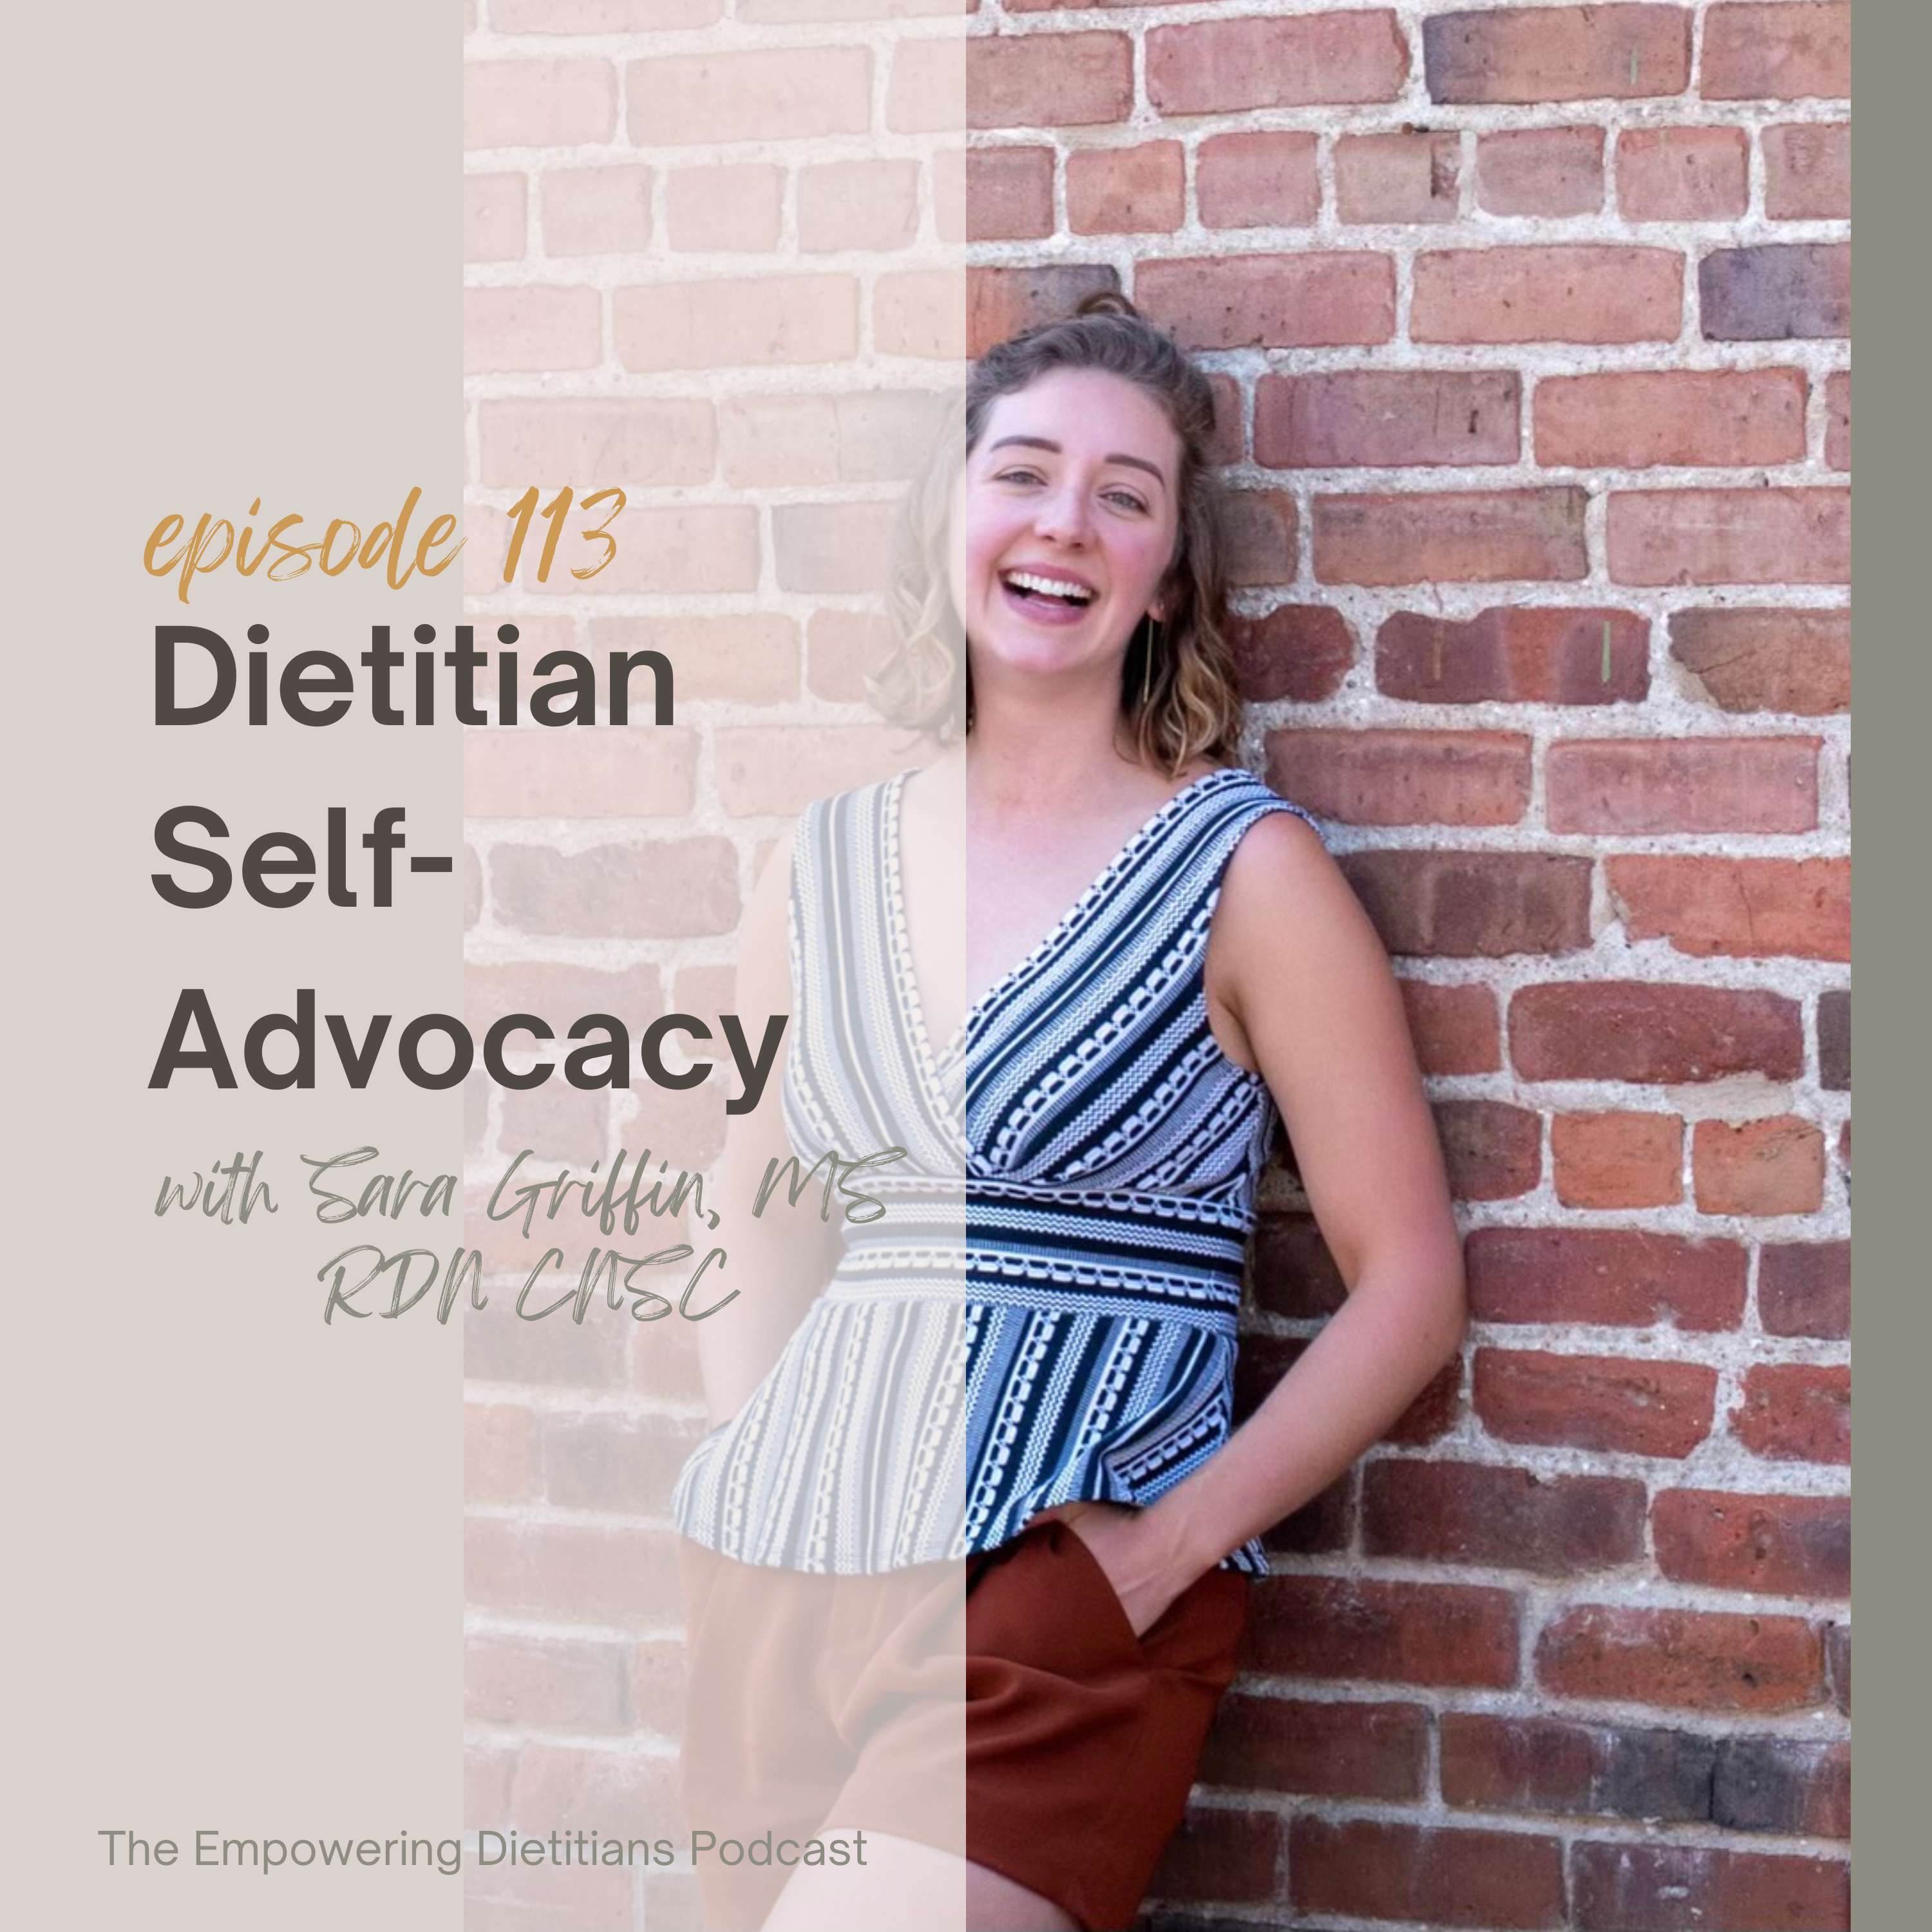 dietitian self-advocacy with sara griffin